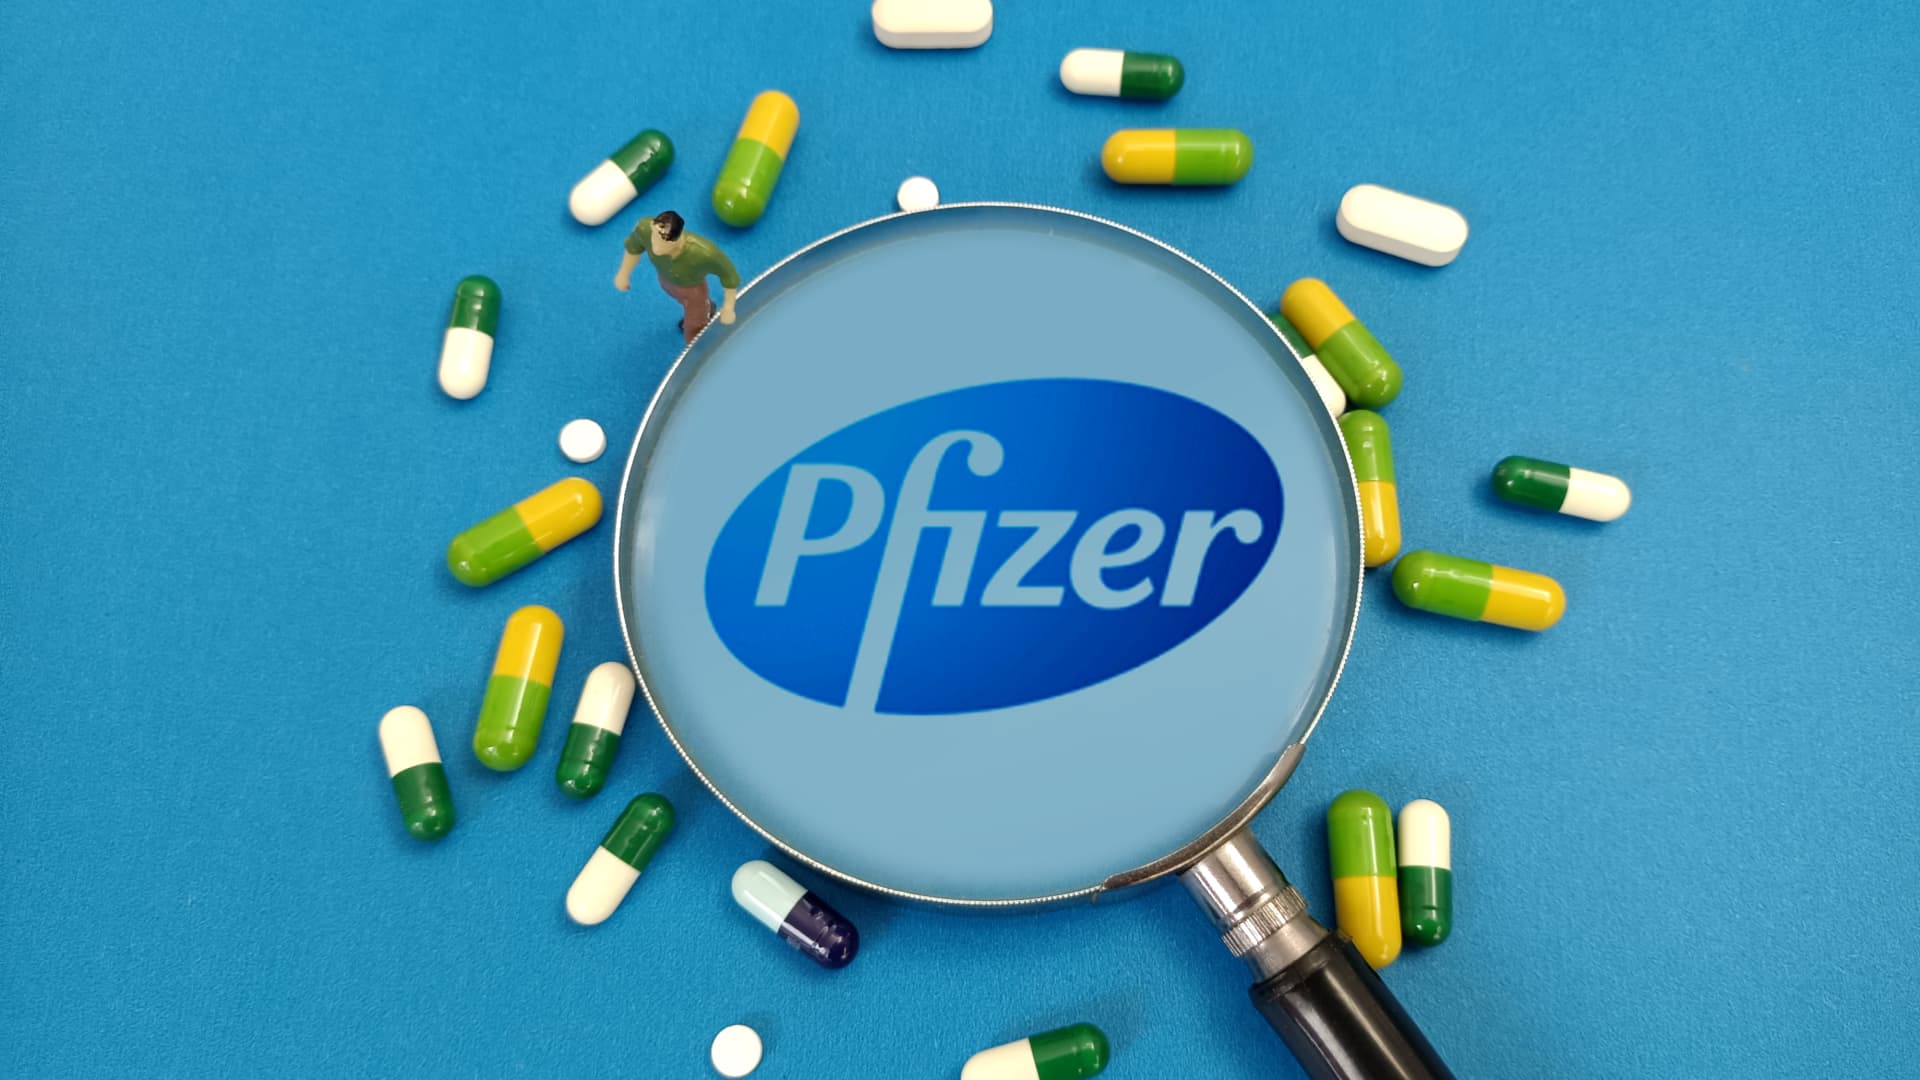 Pfizer lung cancer drug shows promising long-term trial results [Video]